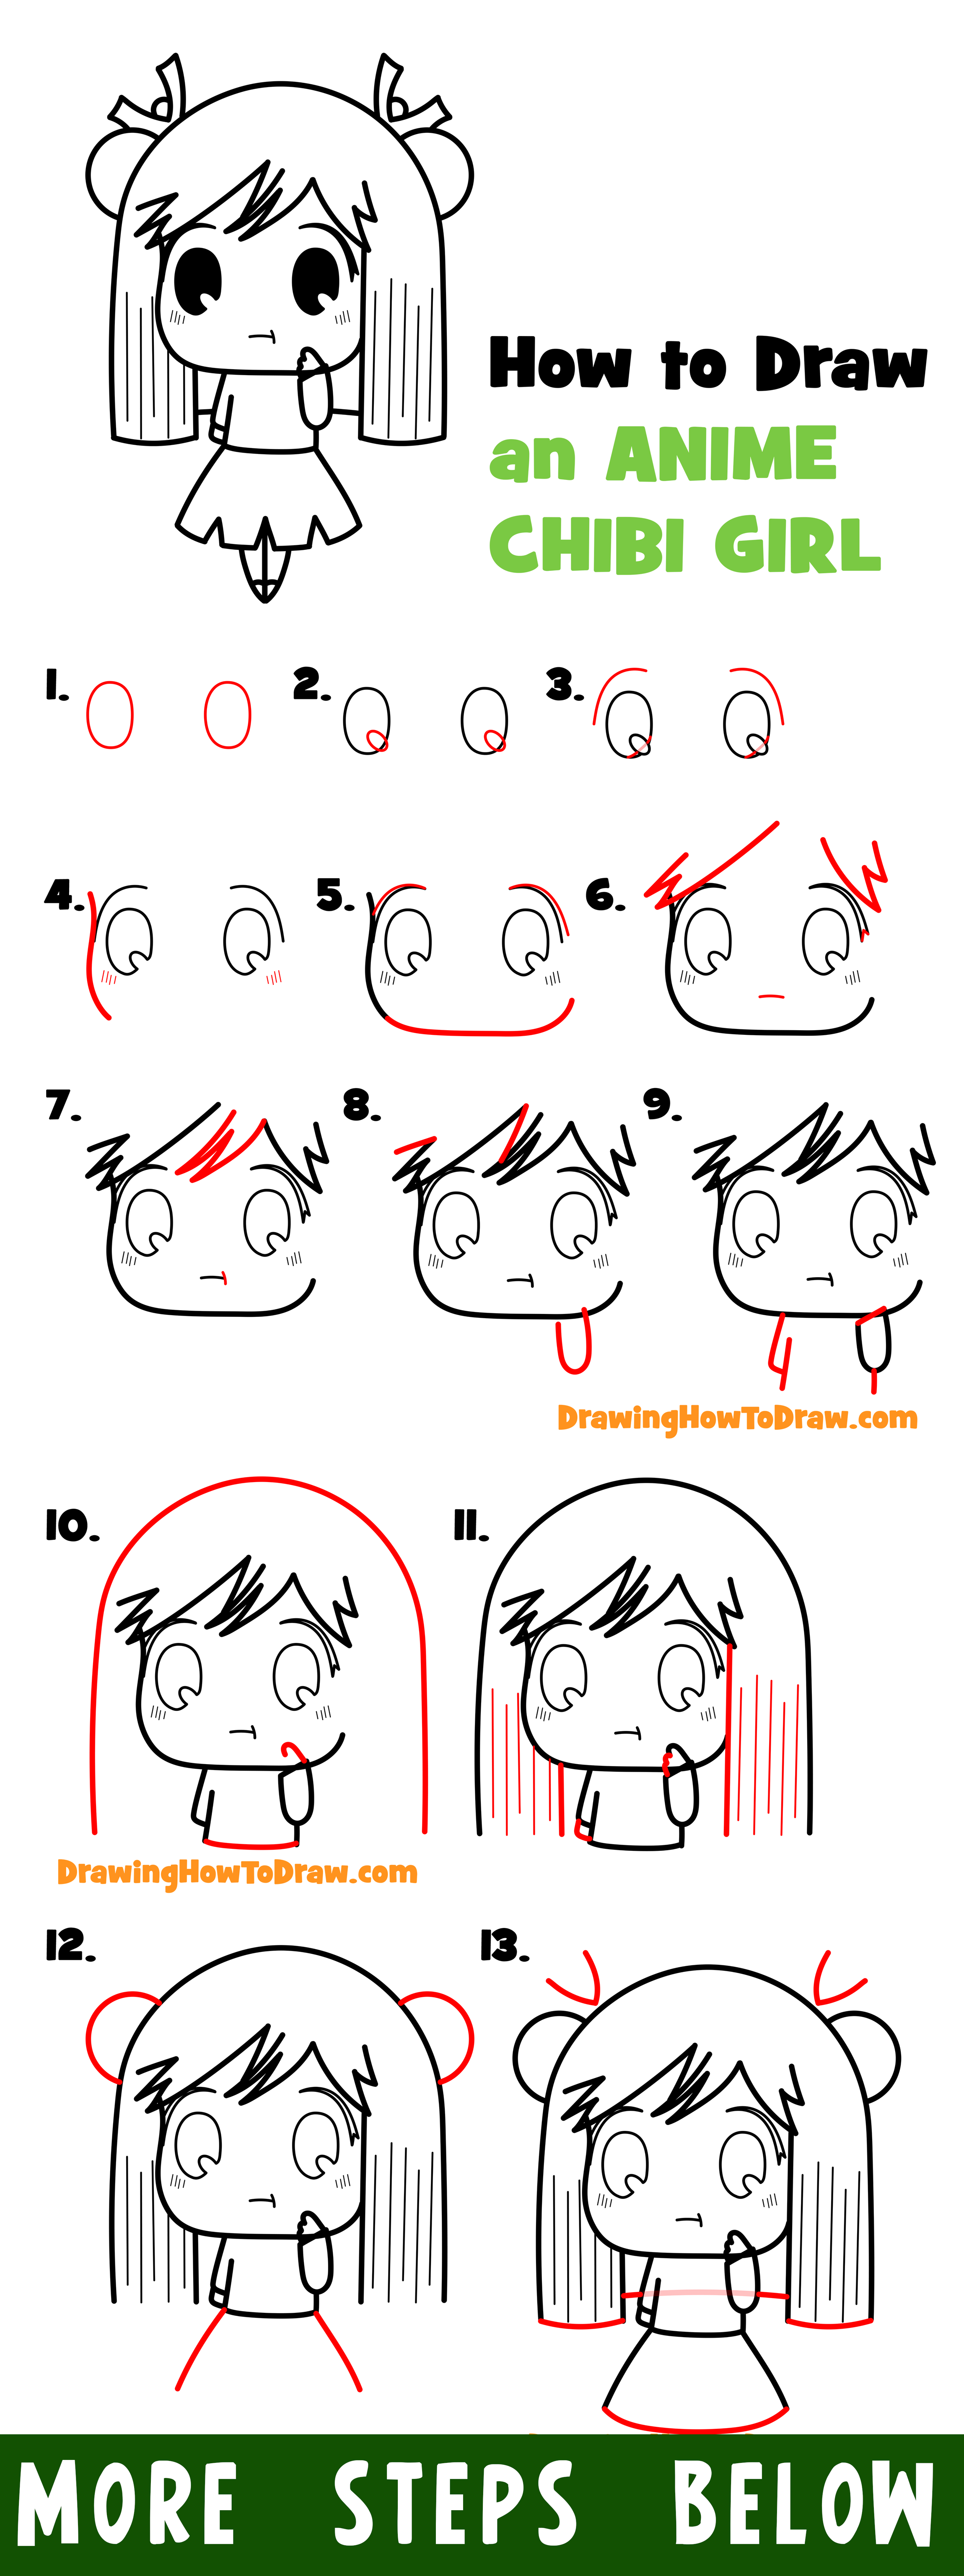 How to Draw Anime Step by Step - Easy Drawings for Kids - DrawingNow